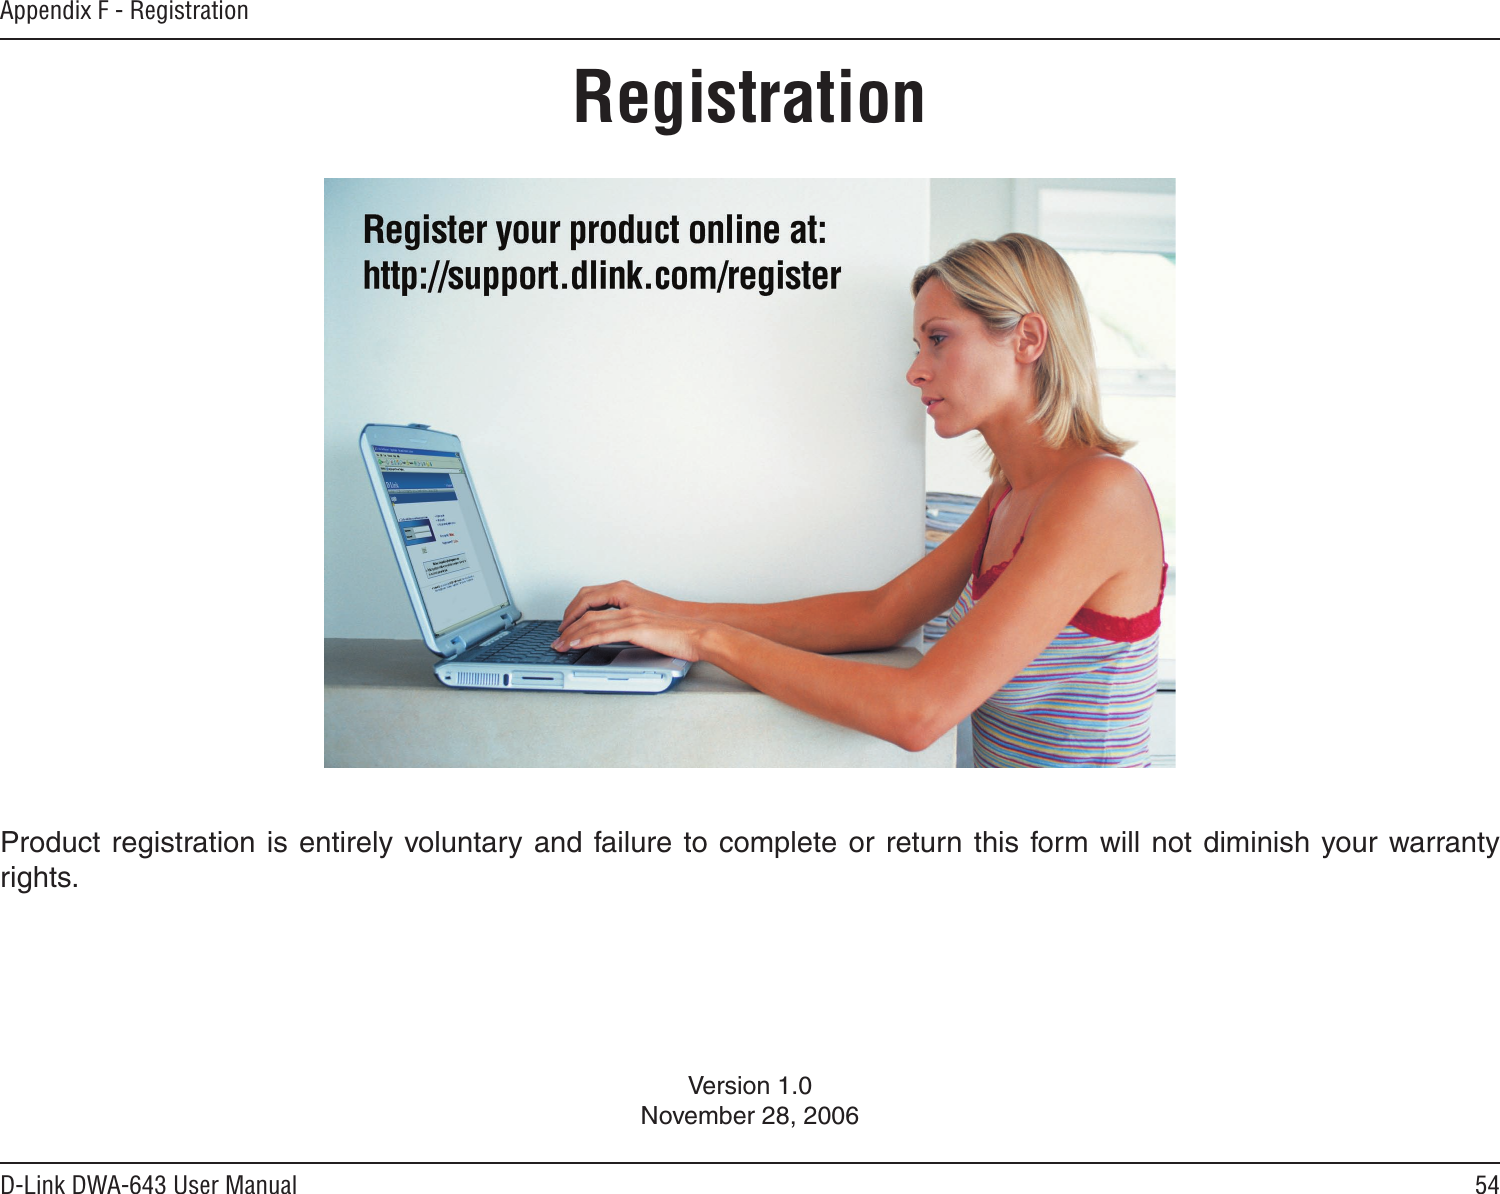 54D-Link DWA-643 User ManualAppendix F - RegistrationVersion 1.0November 28, 2006Product registration is entirely voluntary and failure to complete or return this form will not  diminish your warranty rights.Registration